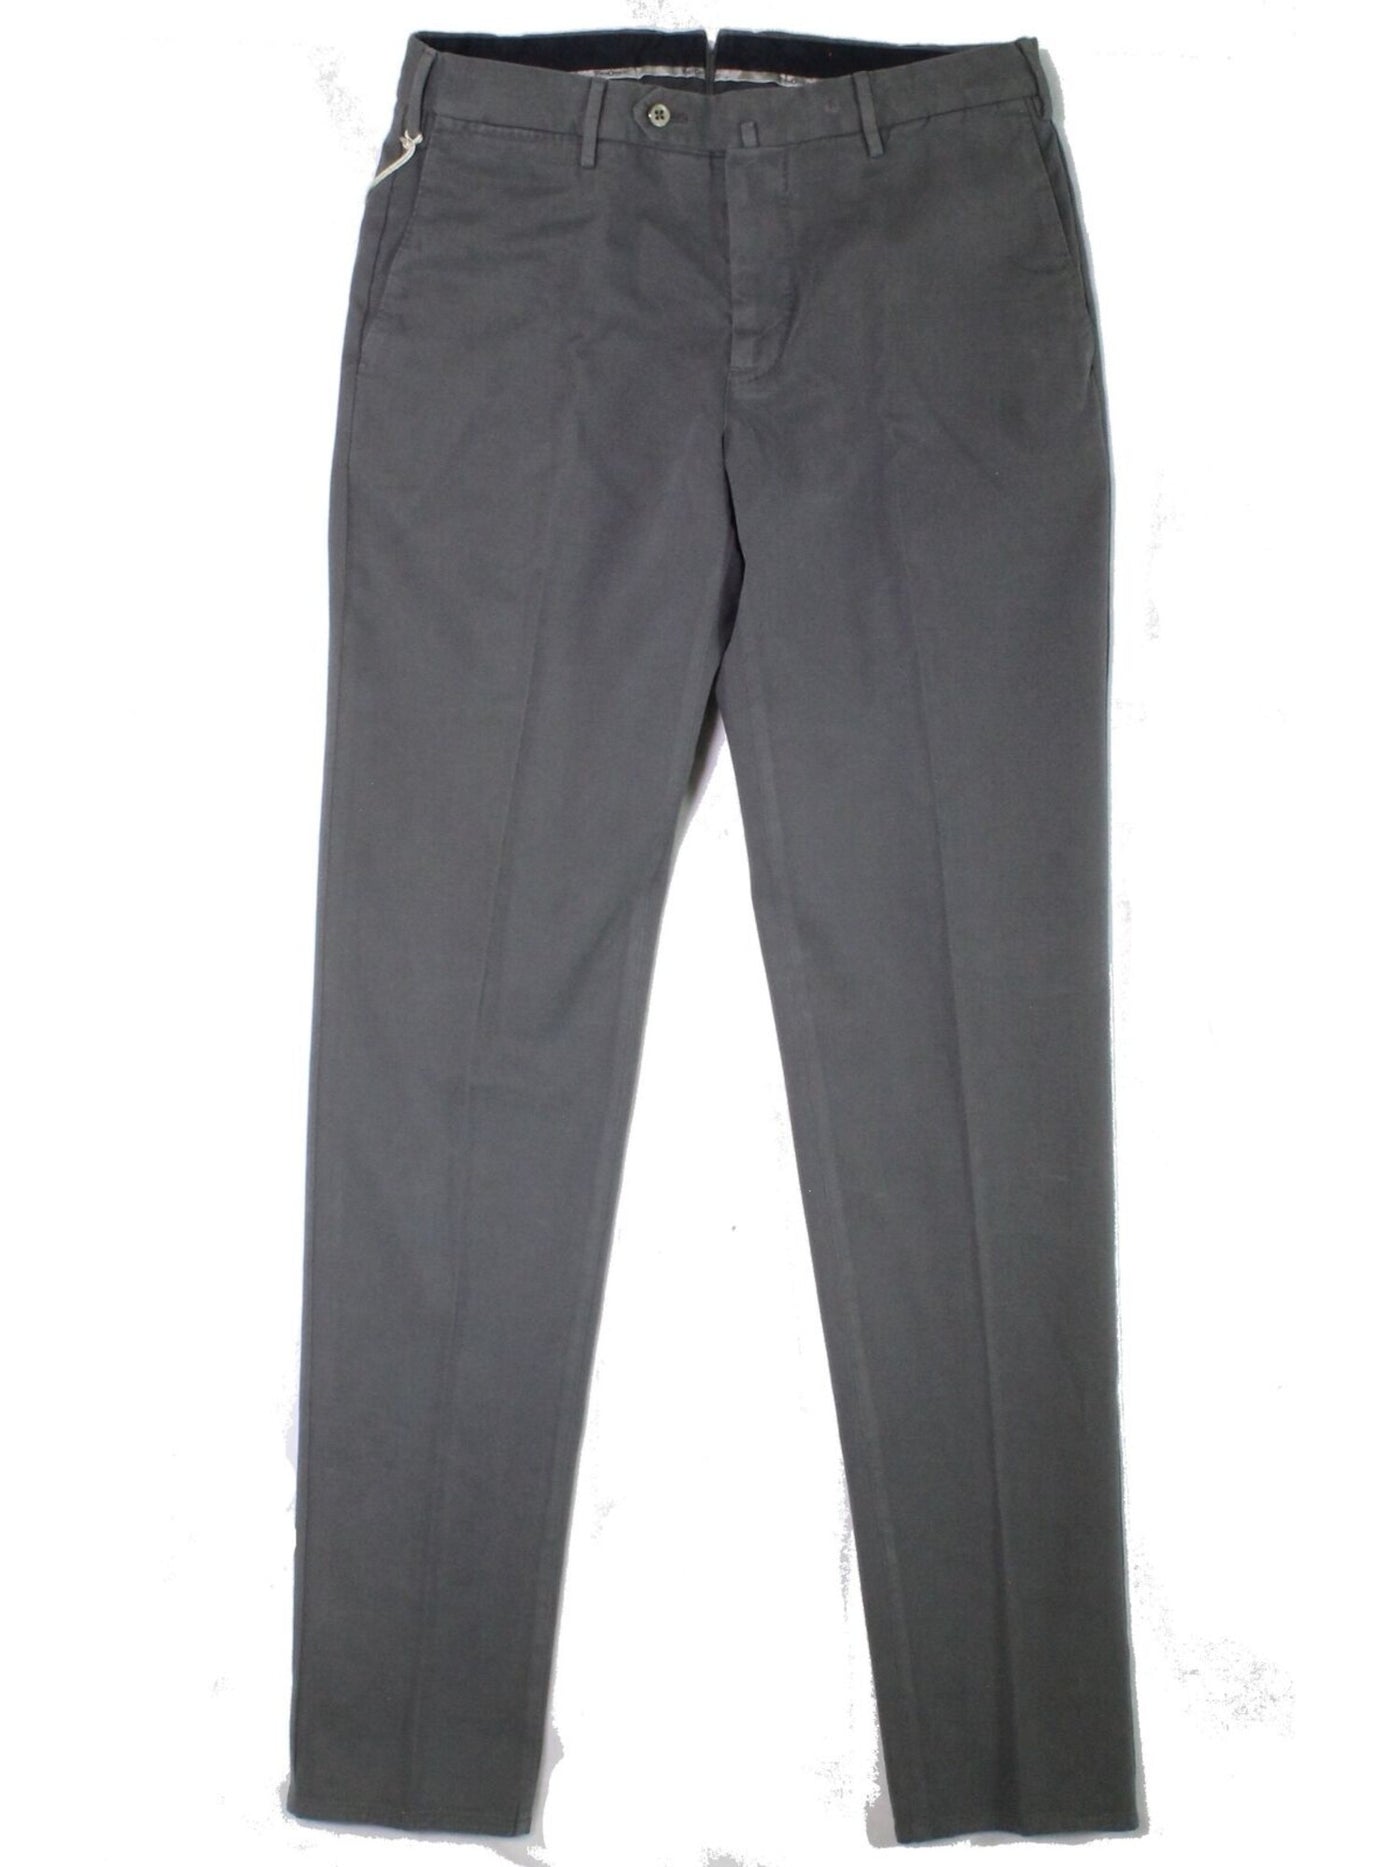 TORIN OPIFICIO Mens Gray Stretch, Tapered, Classic Fit Chino Pants 54